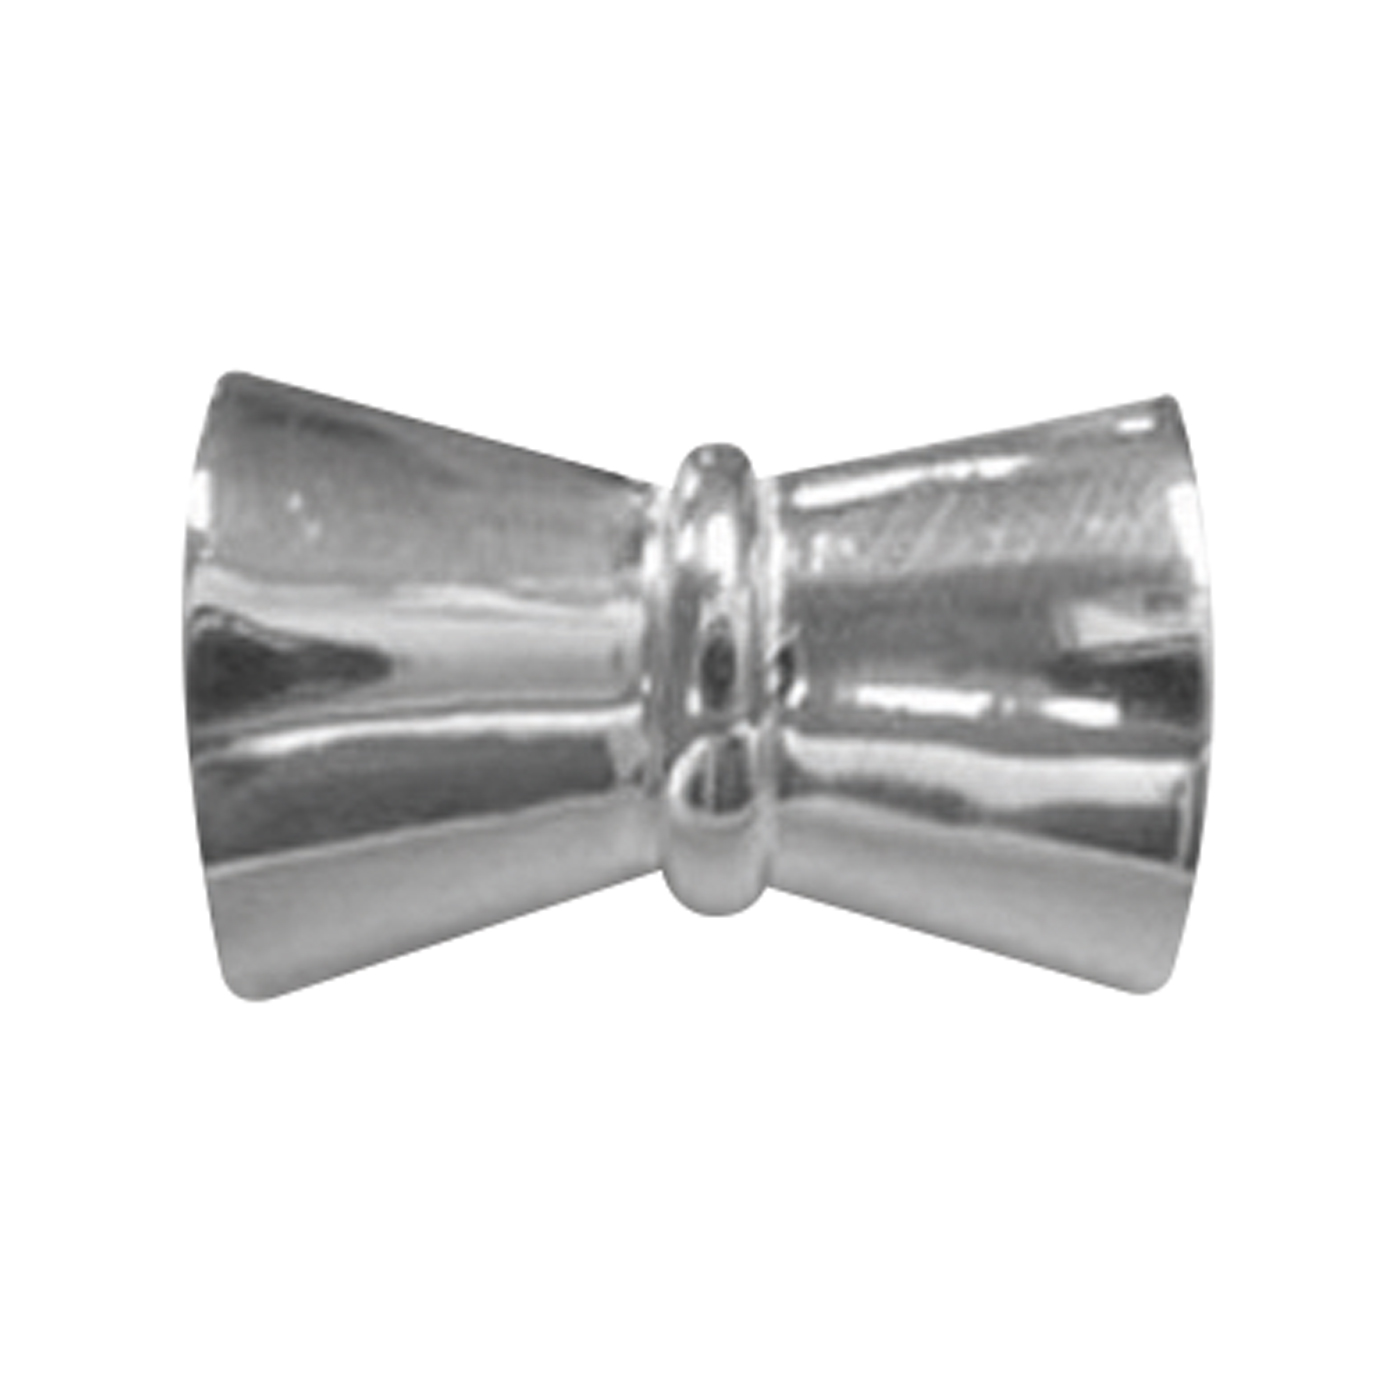 Magnetic Clasp, Double Cone, 925Ag Polished, 16.8 x 12.4 mm - 1 piece